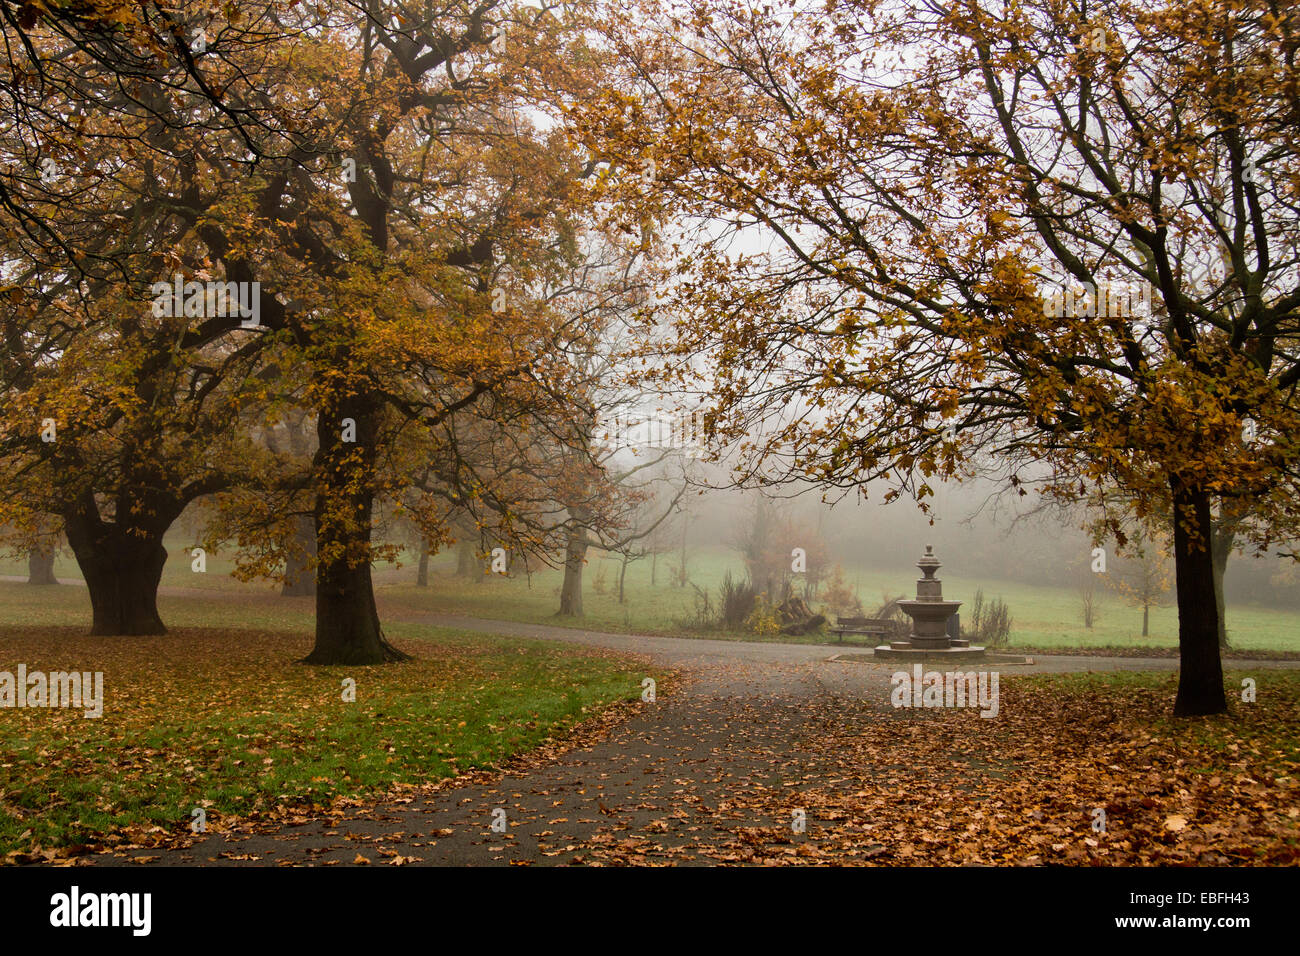 Autumn park in London. View of path and trees surrounding stone fountain Stock Photo